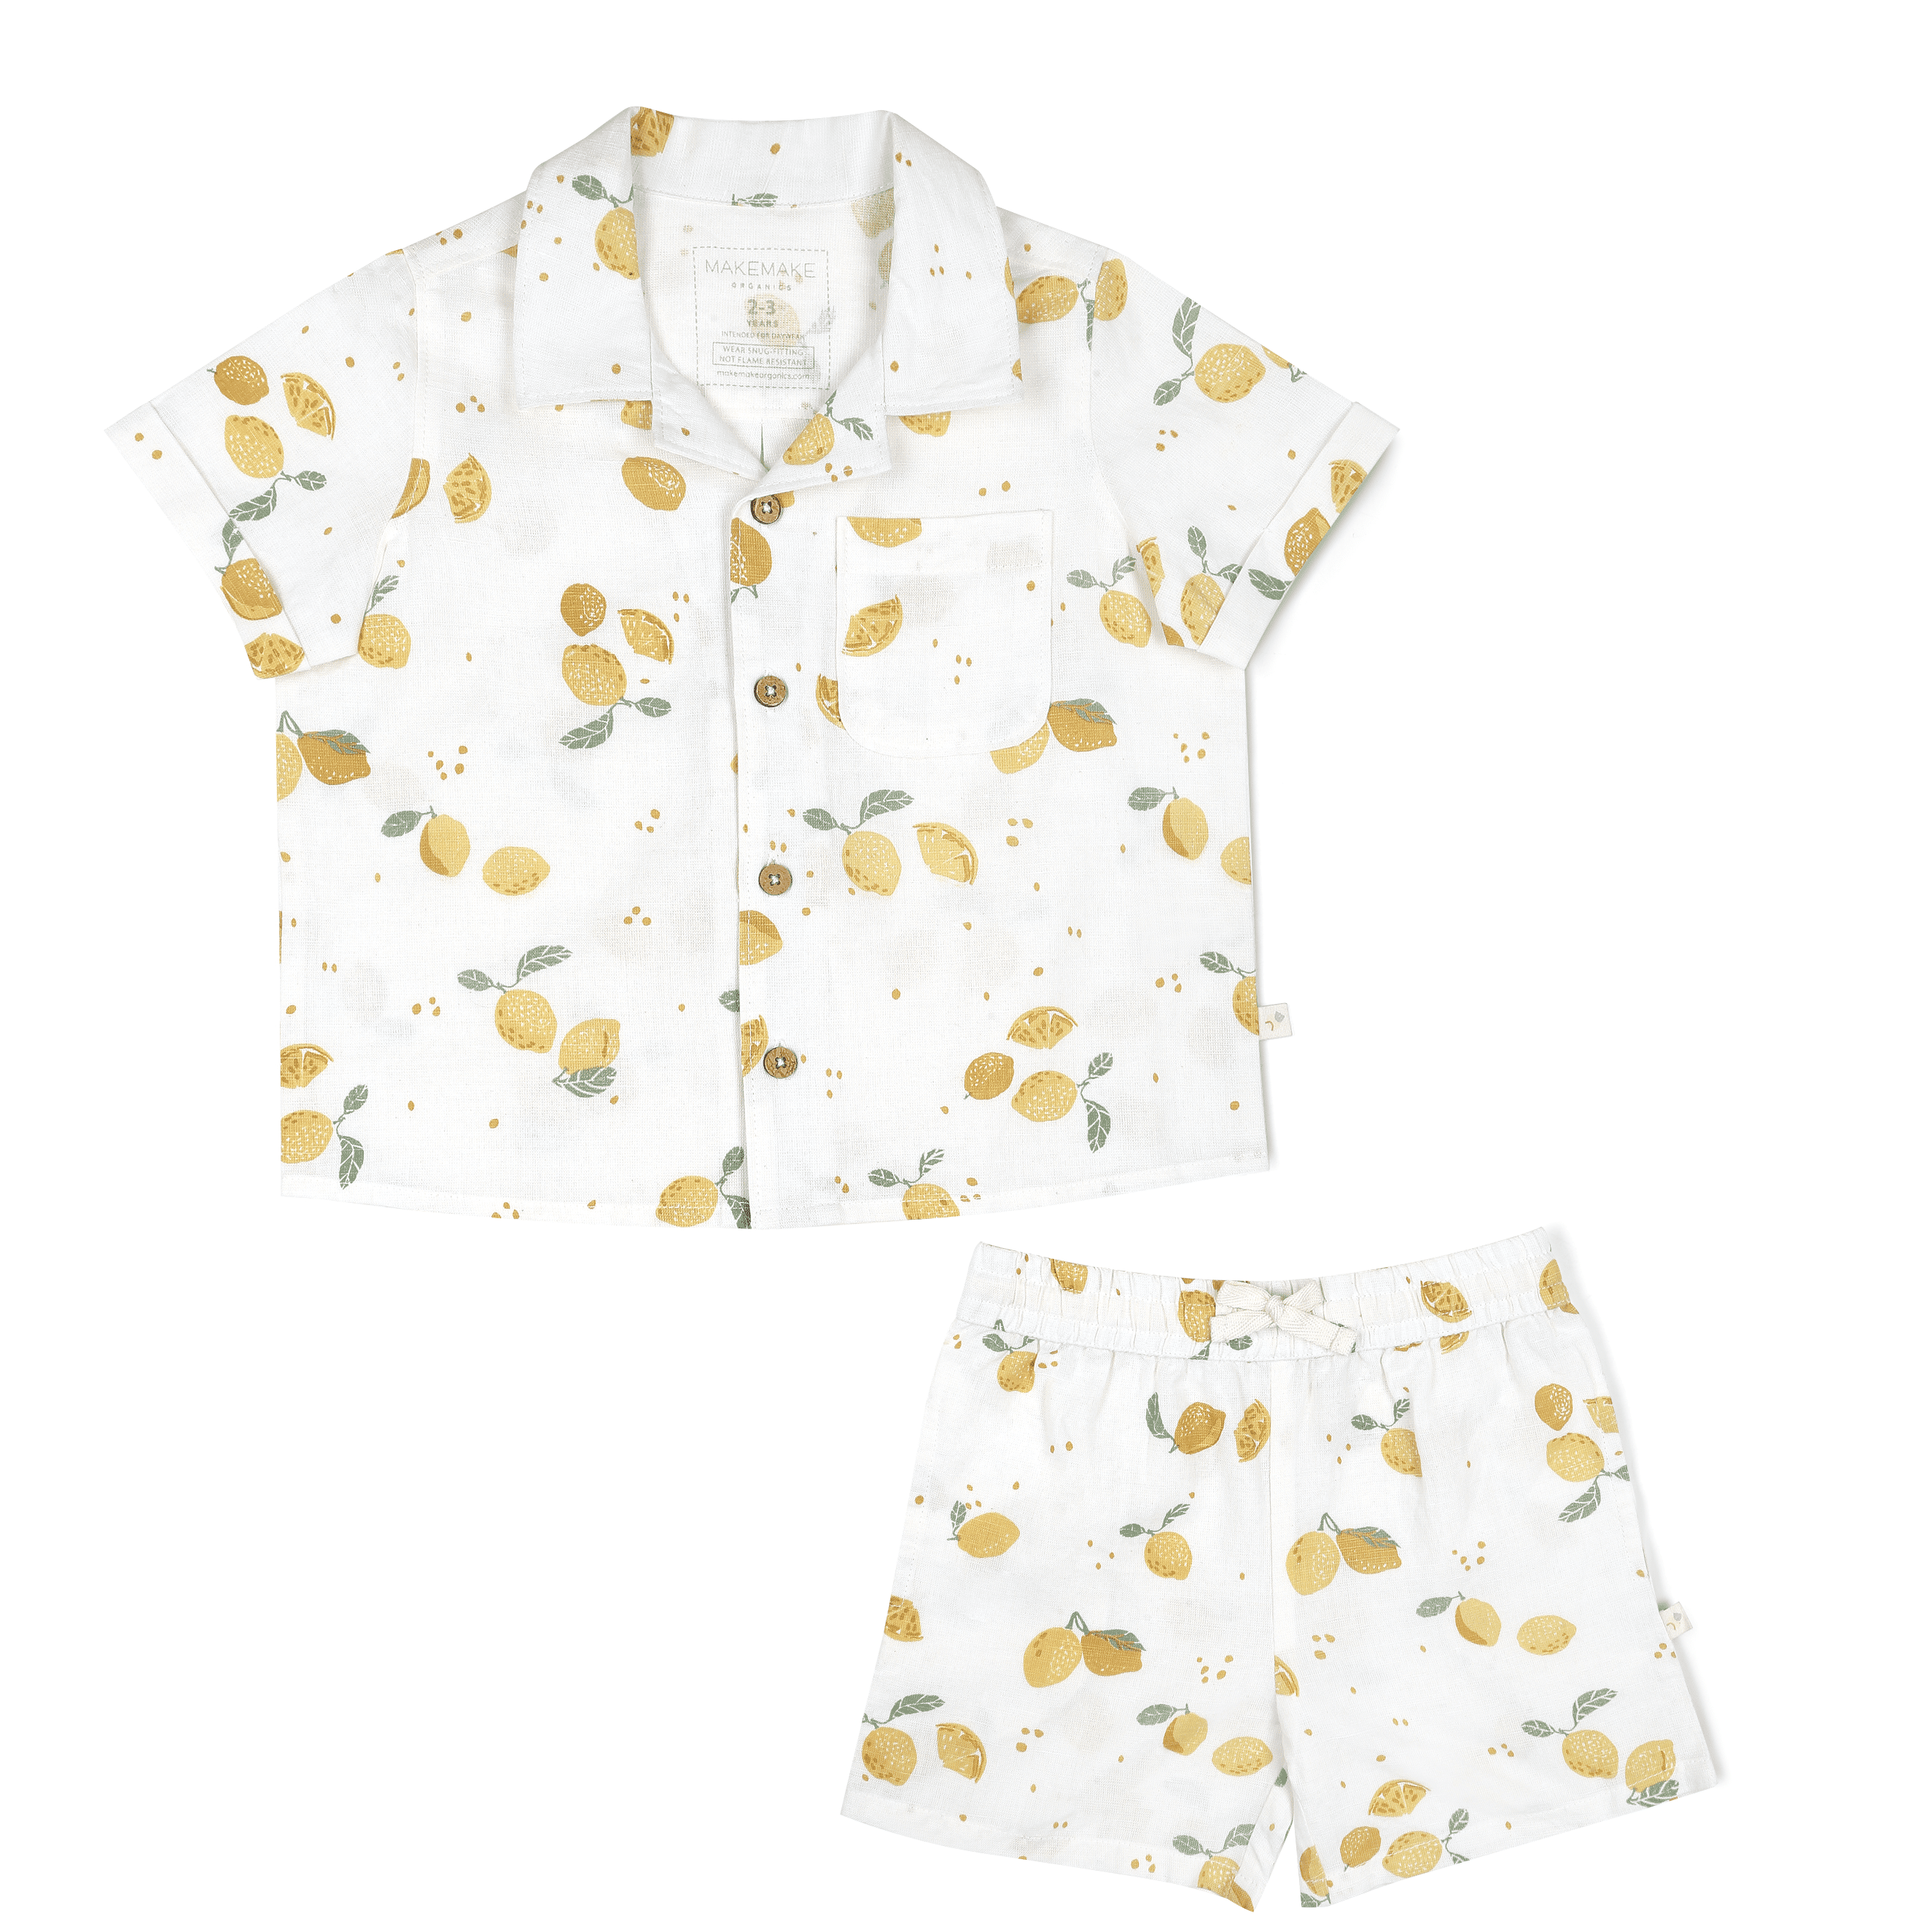 A toddler's Makemake Organics Organic Linen Shirt and Shorts Set in Citron, displayed flat on a white background.